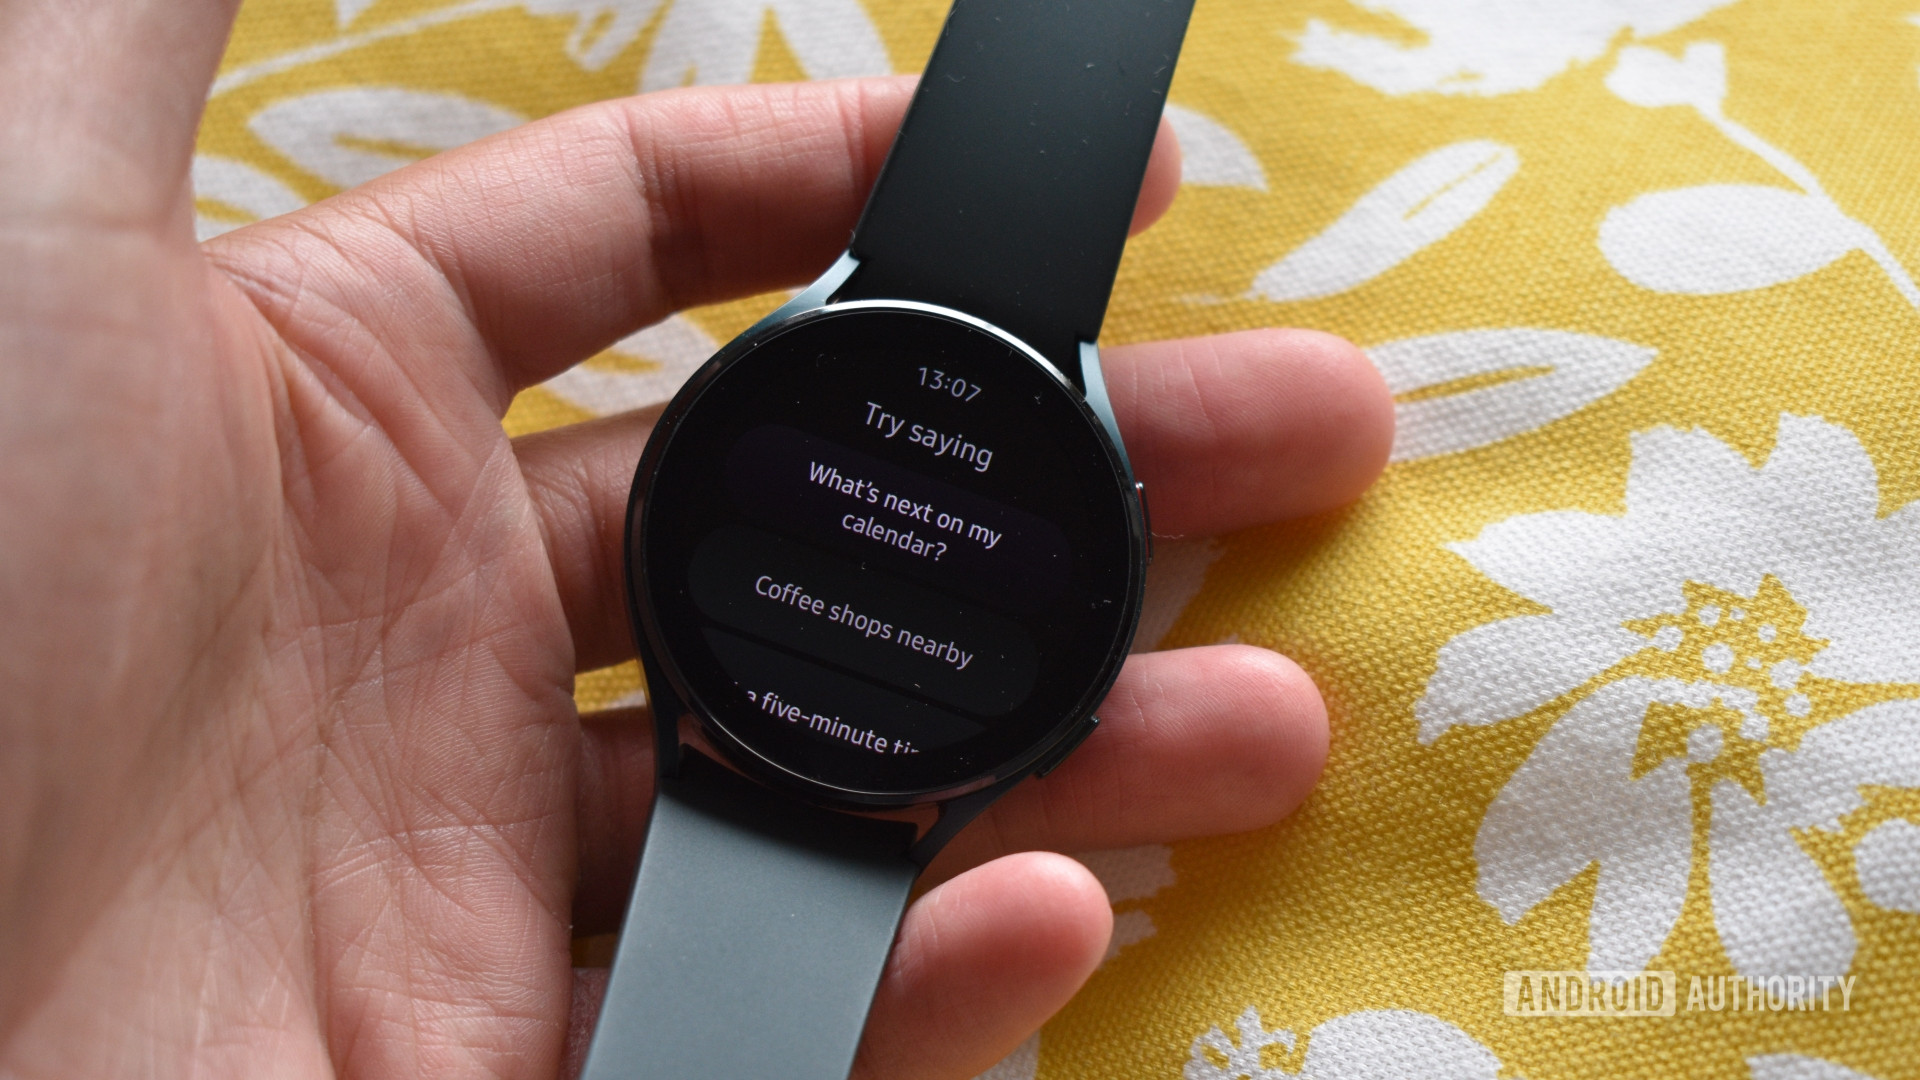 A user queries Google Assistant on their Wear OS device.